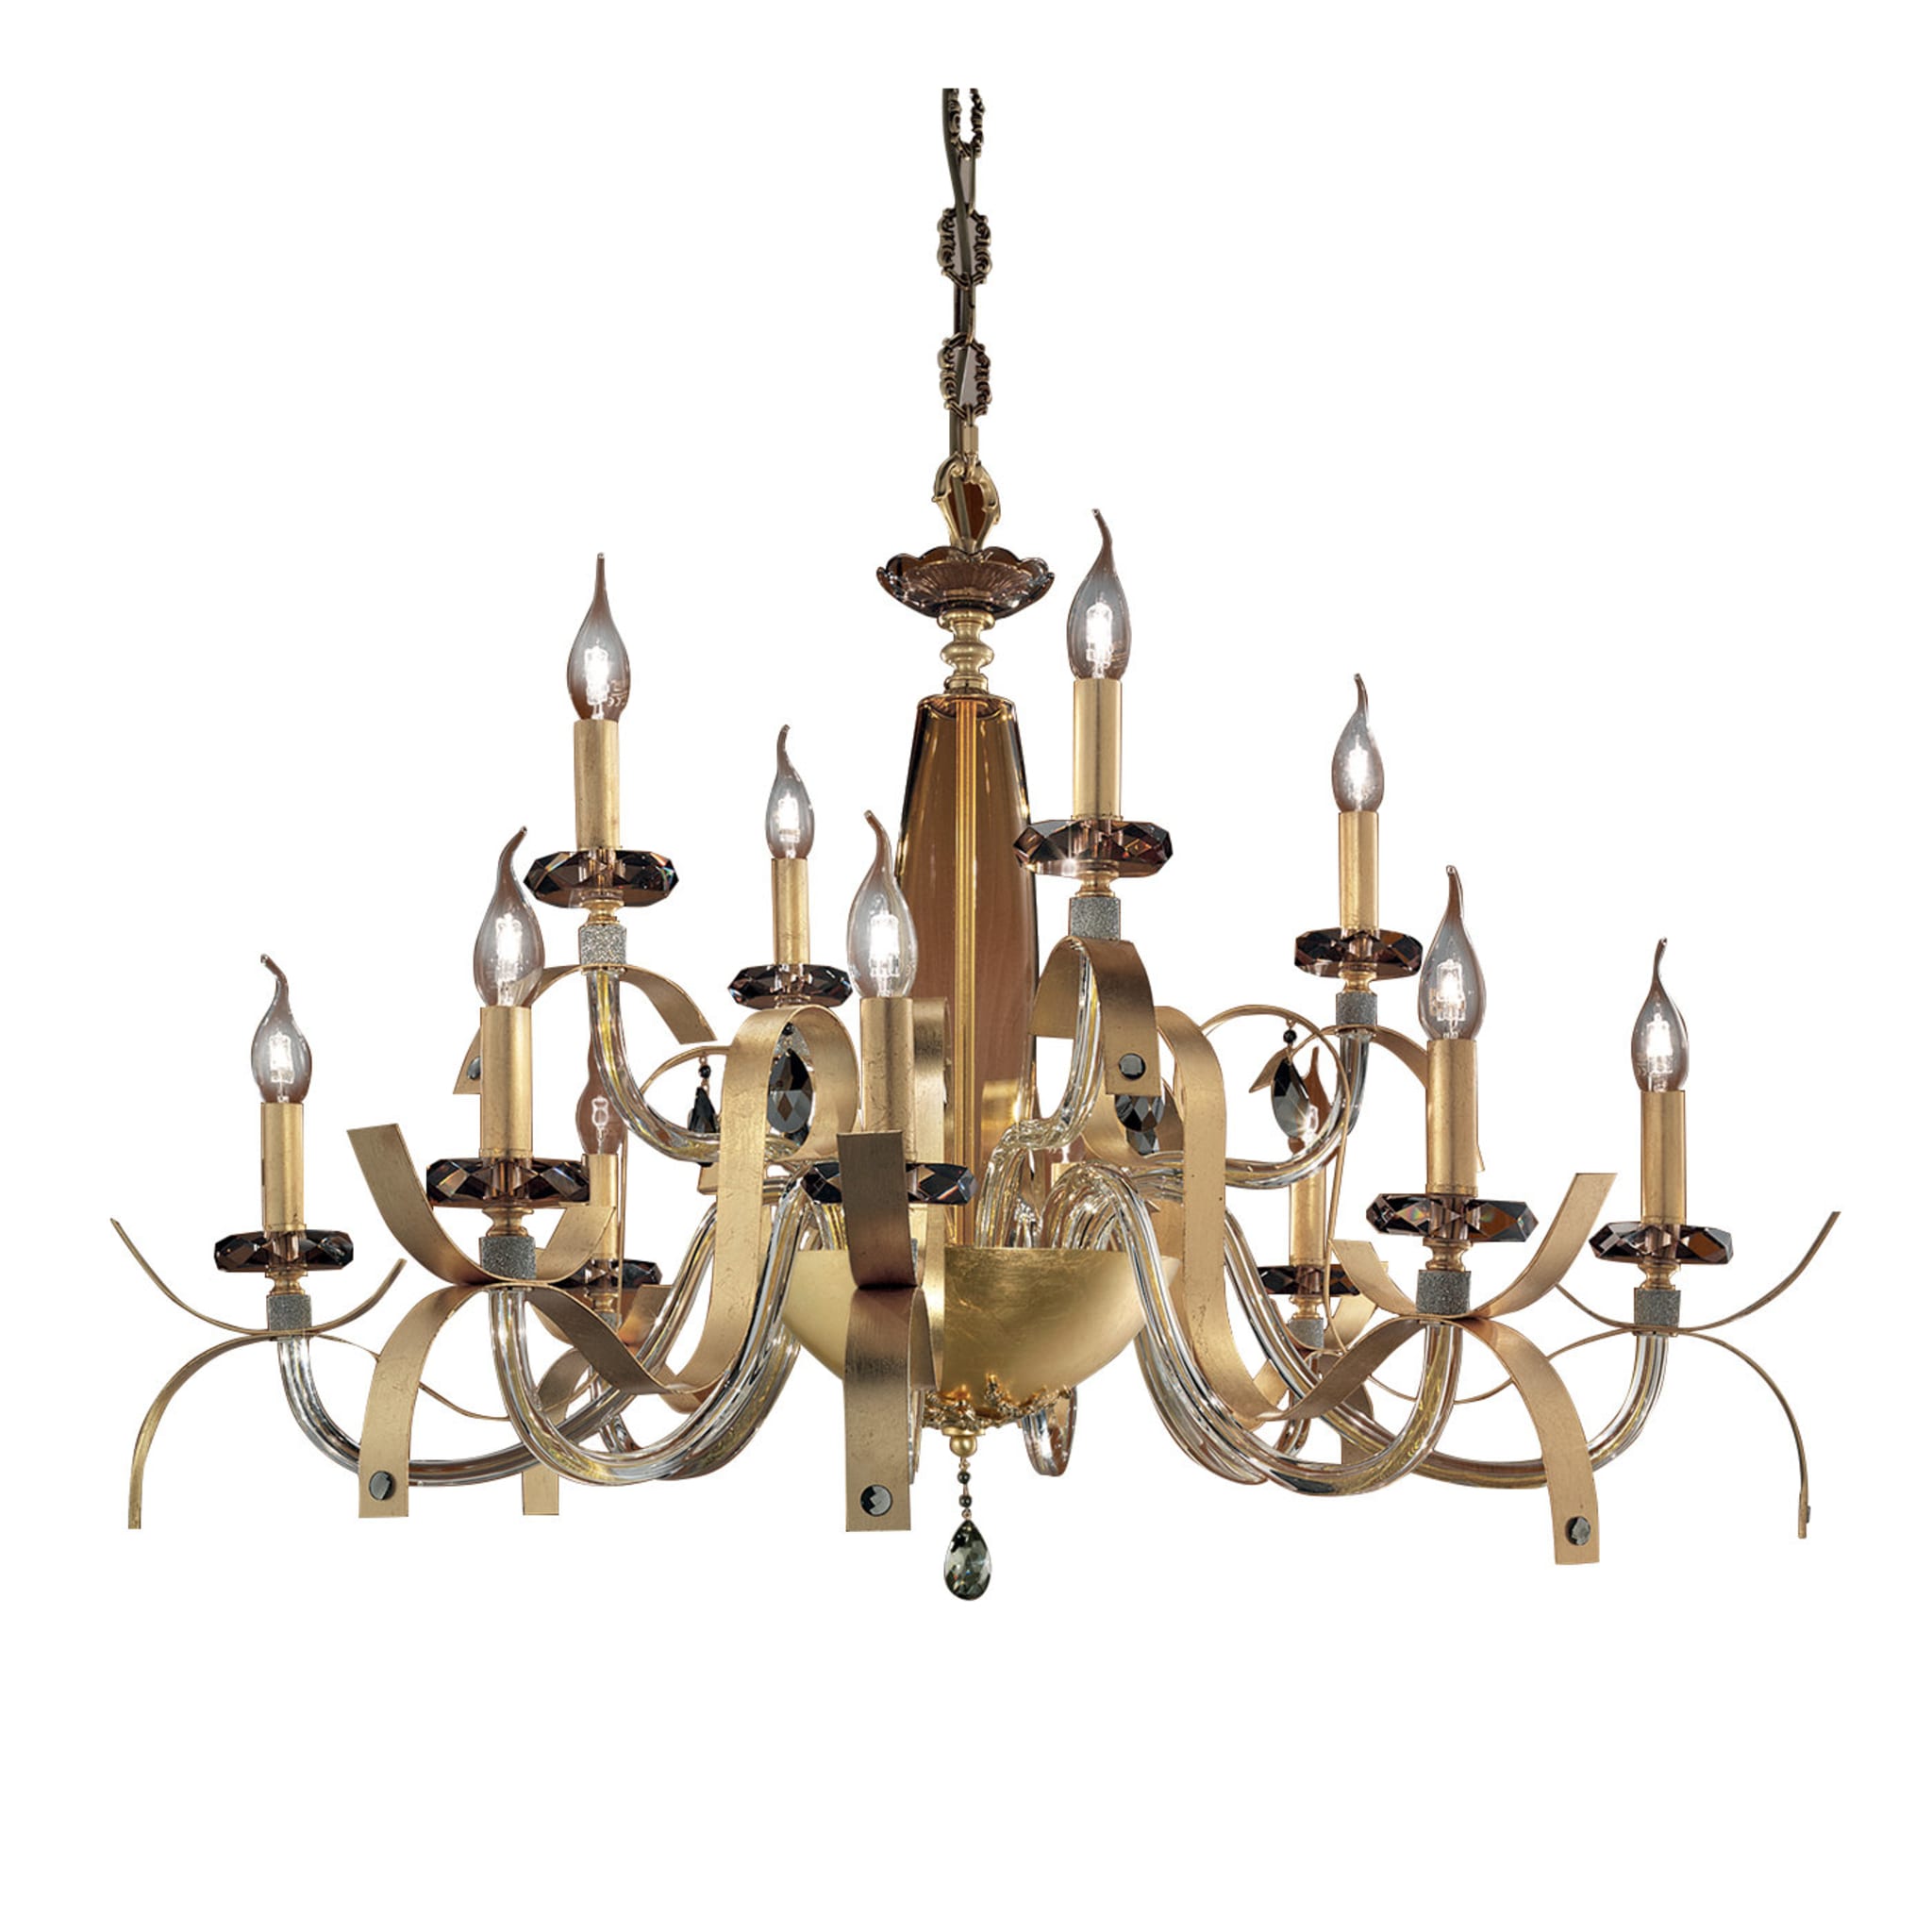 Nuage Gold Chandelier 12 Lights - Main view